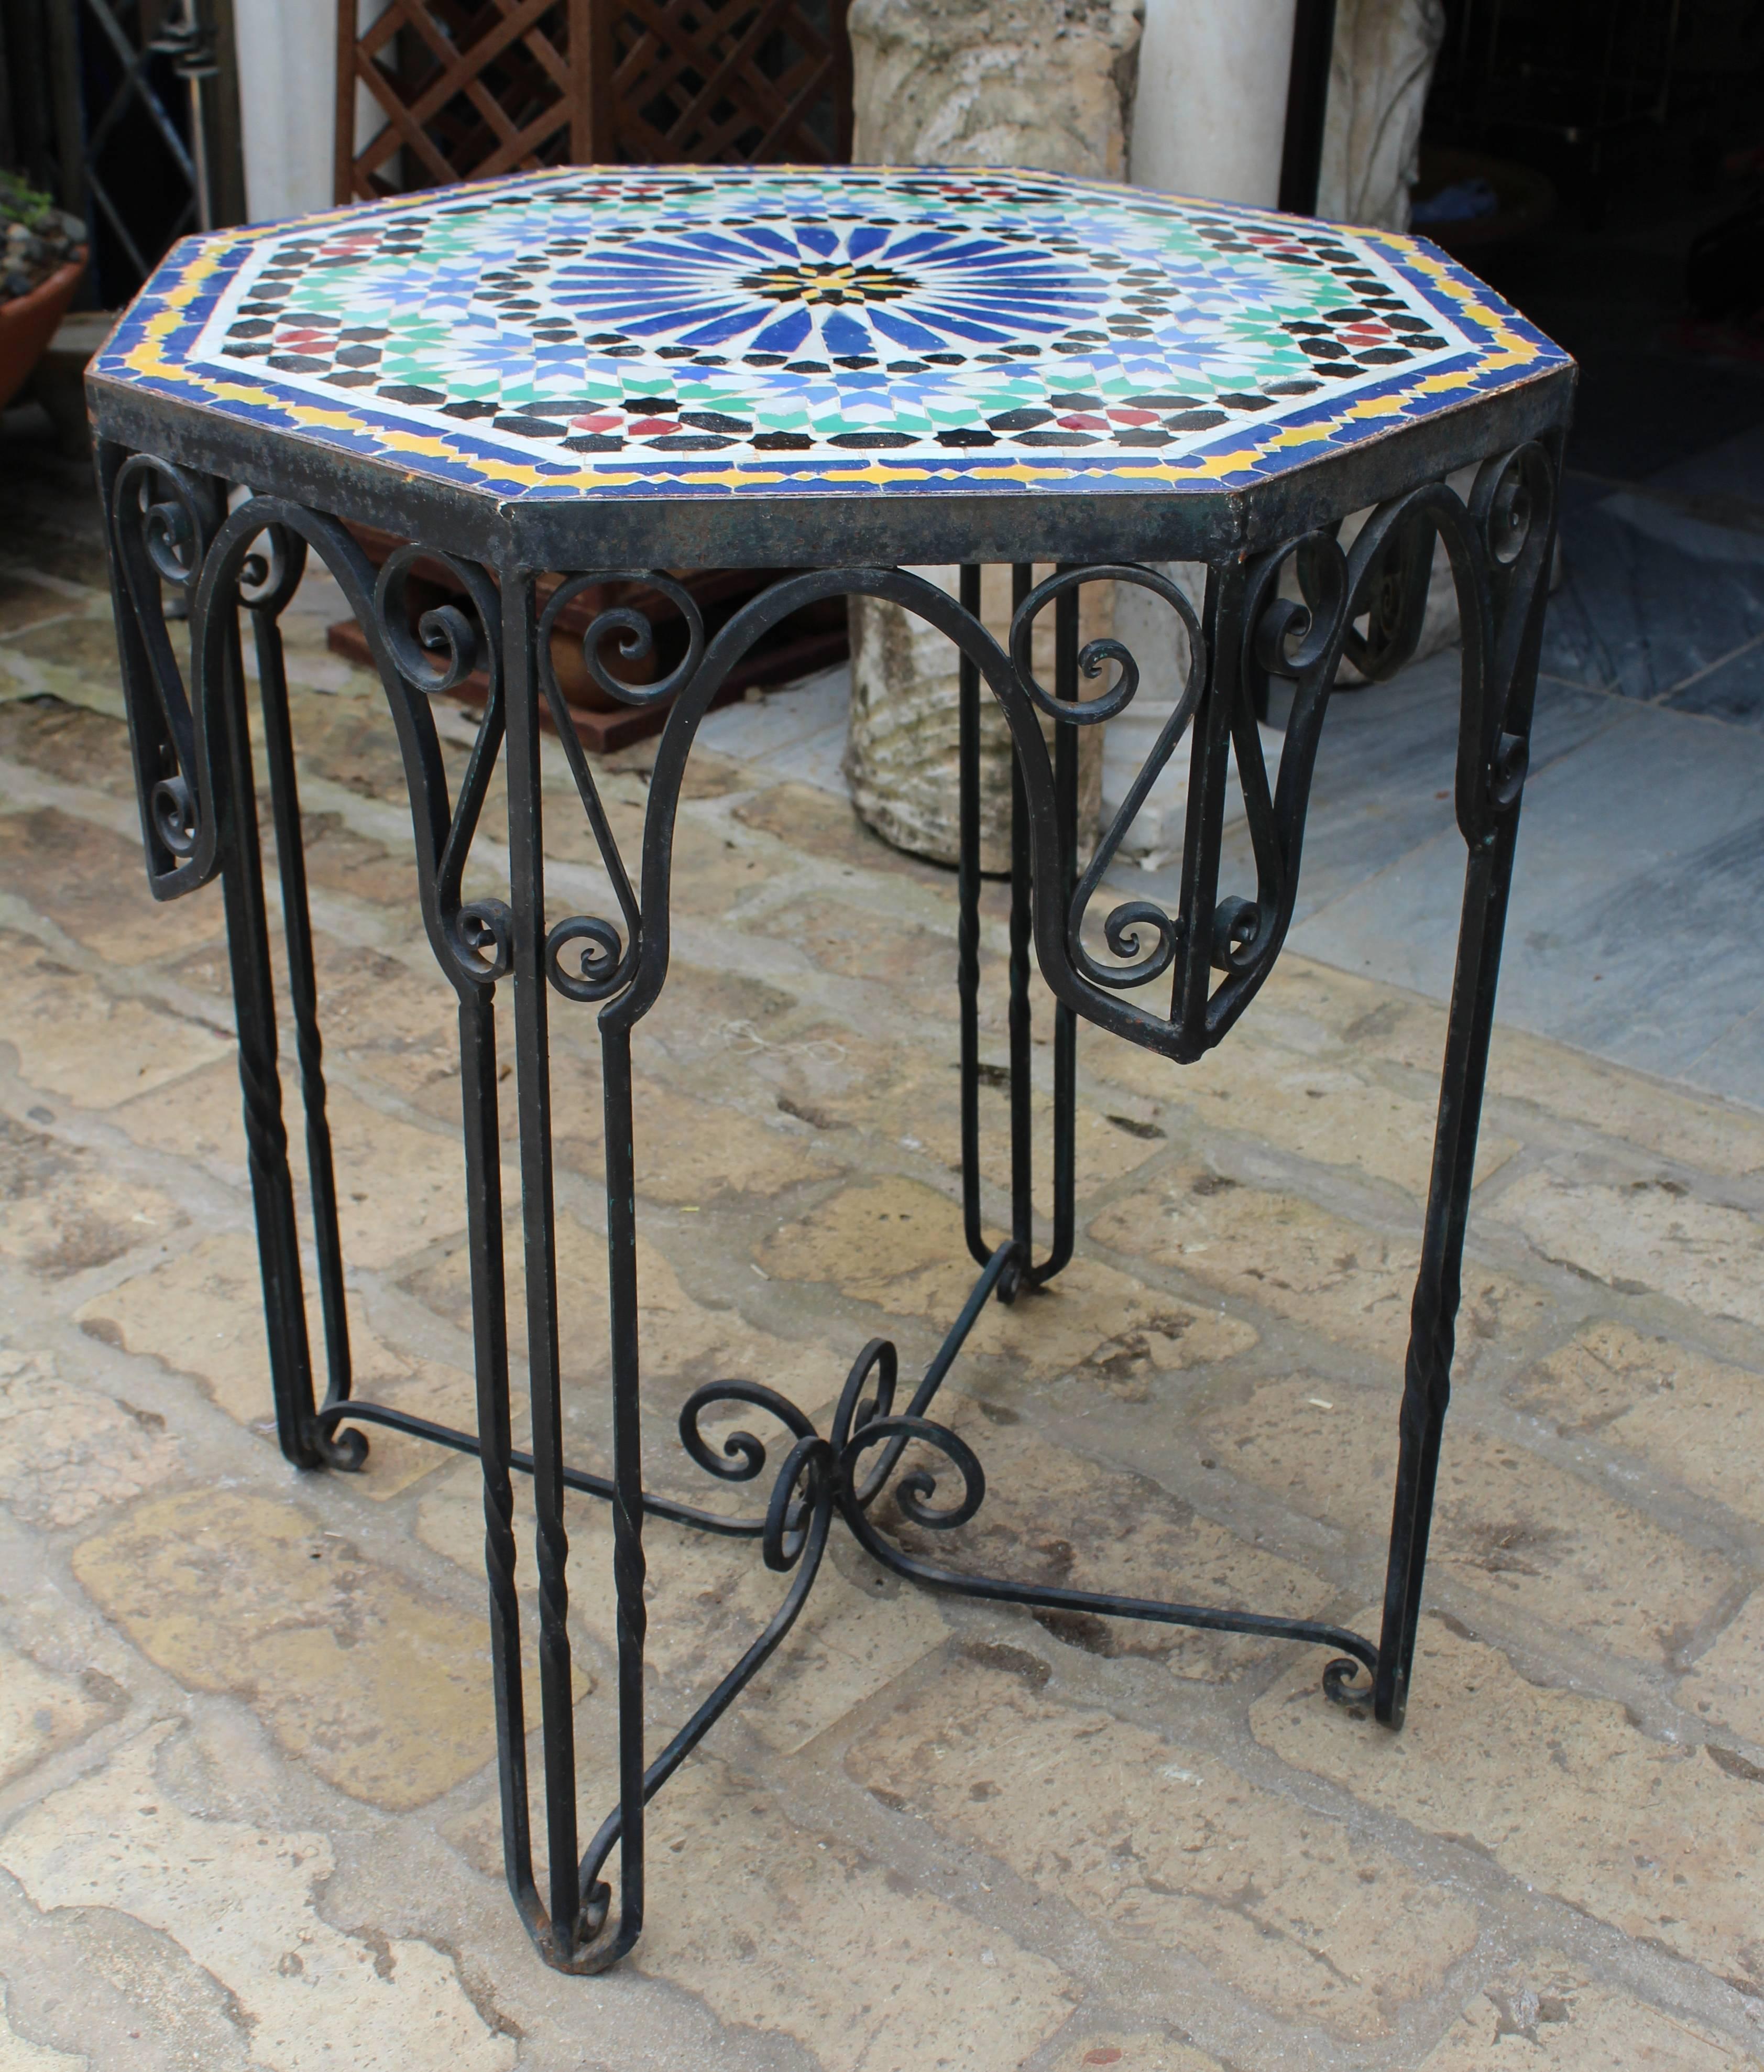 1950s octagonal grazed ceramic Andalusian geometric mosaic table on a wrought iron base decorated with scrolls.